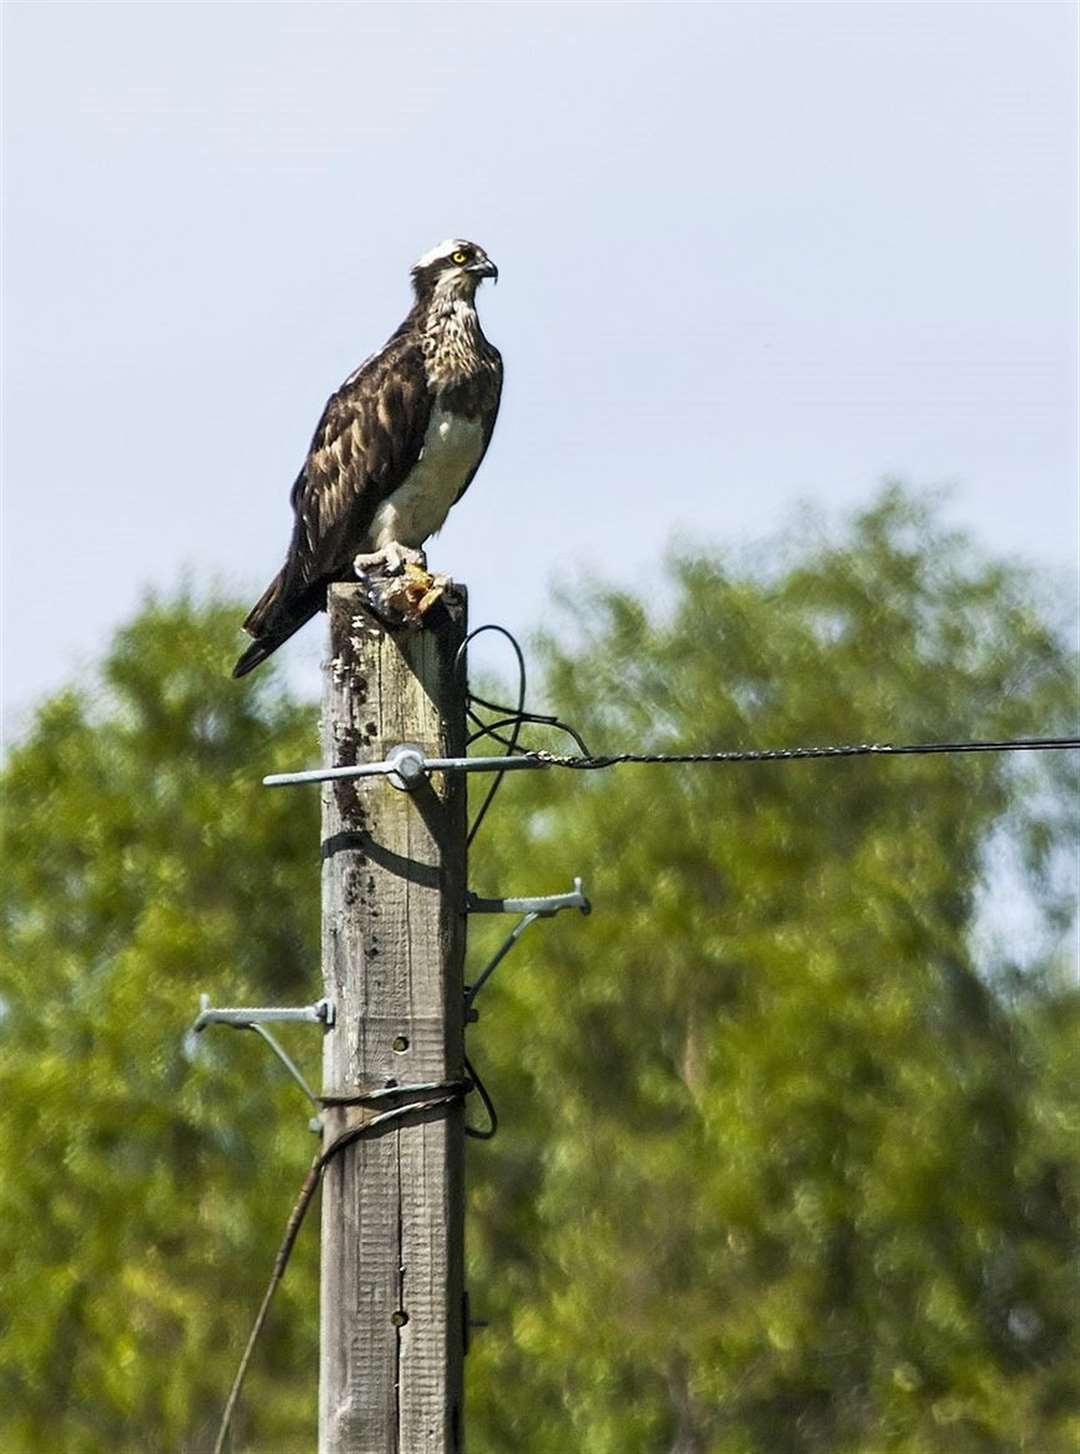 An osprey captured in an image by raptor enthusiast Rod Foster from Forss.